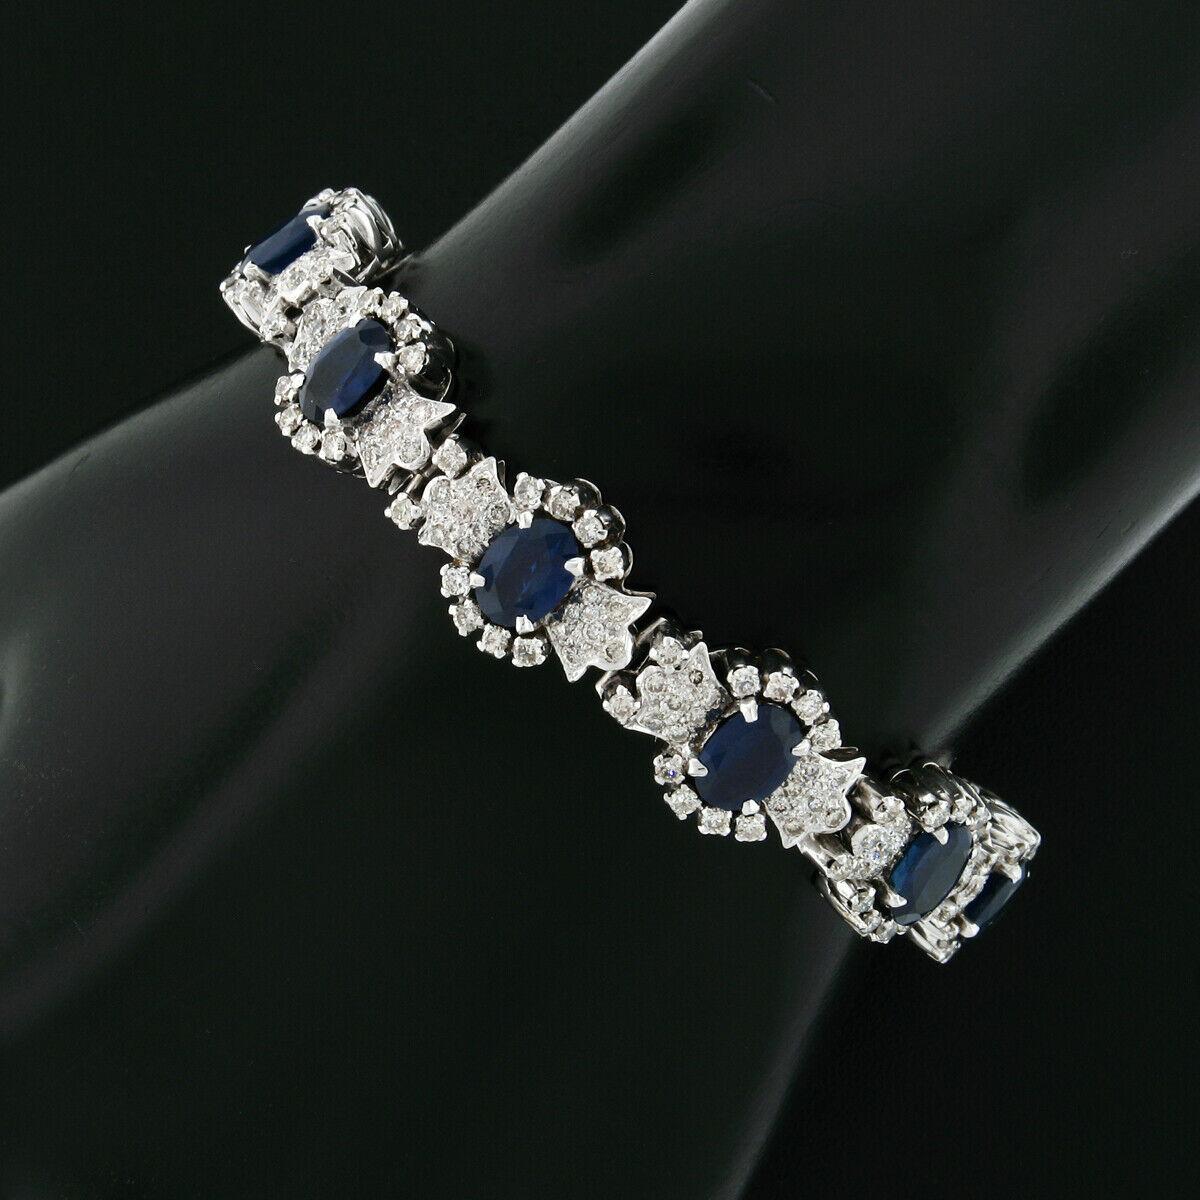 This magnificent statement piece is very well crafted in solid 14k white gold and is set with fine quality diamonds and sapphires throughout. The bracelet features 12 consistent floral links, with each being set with an oval cut sapphire that's